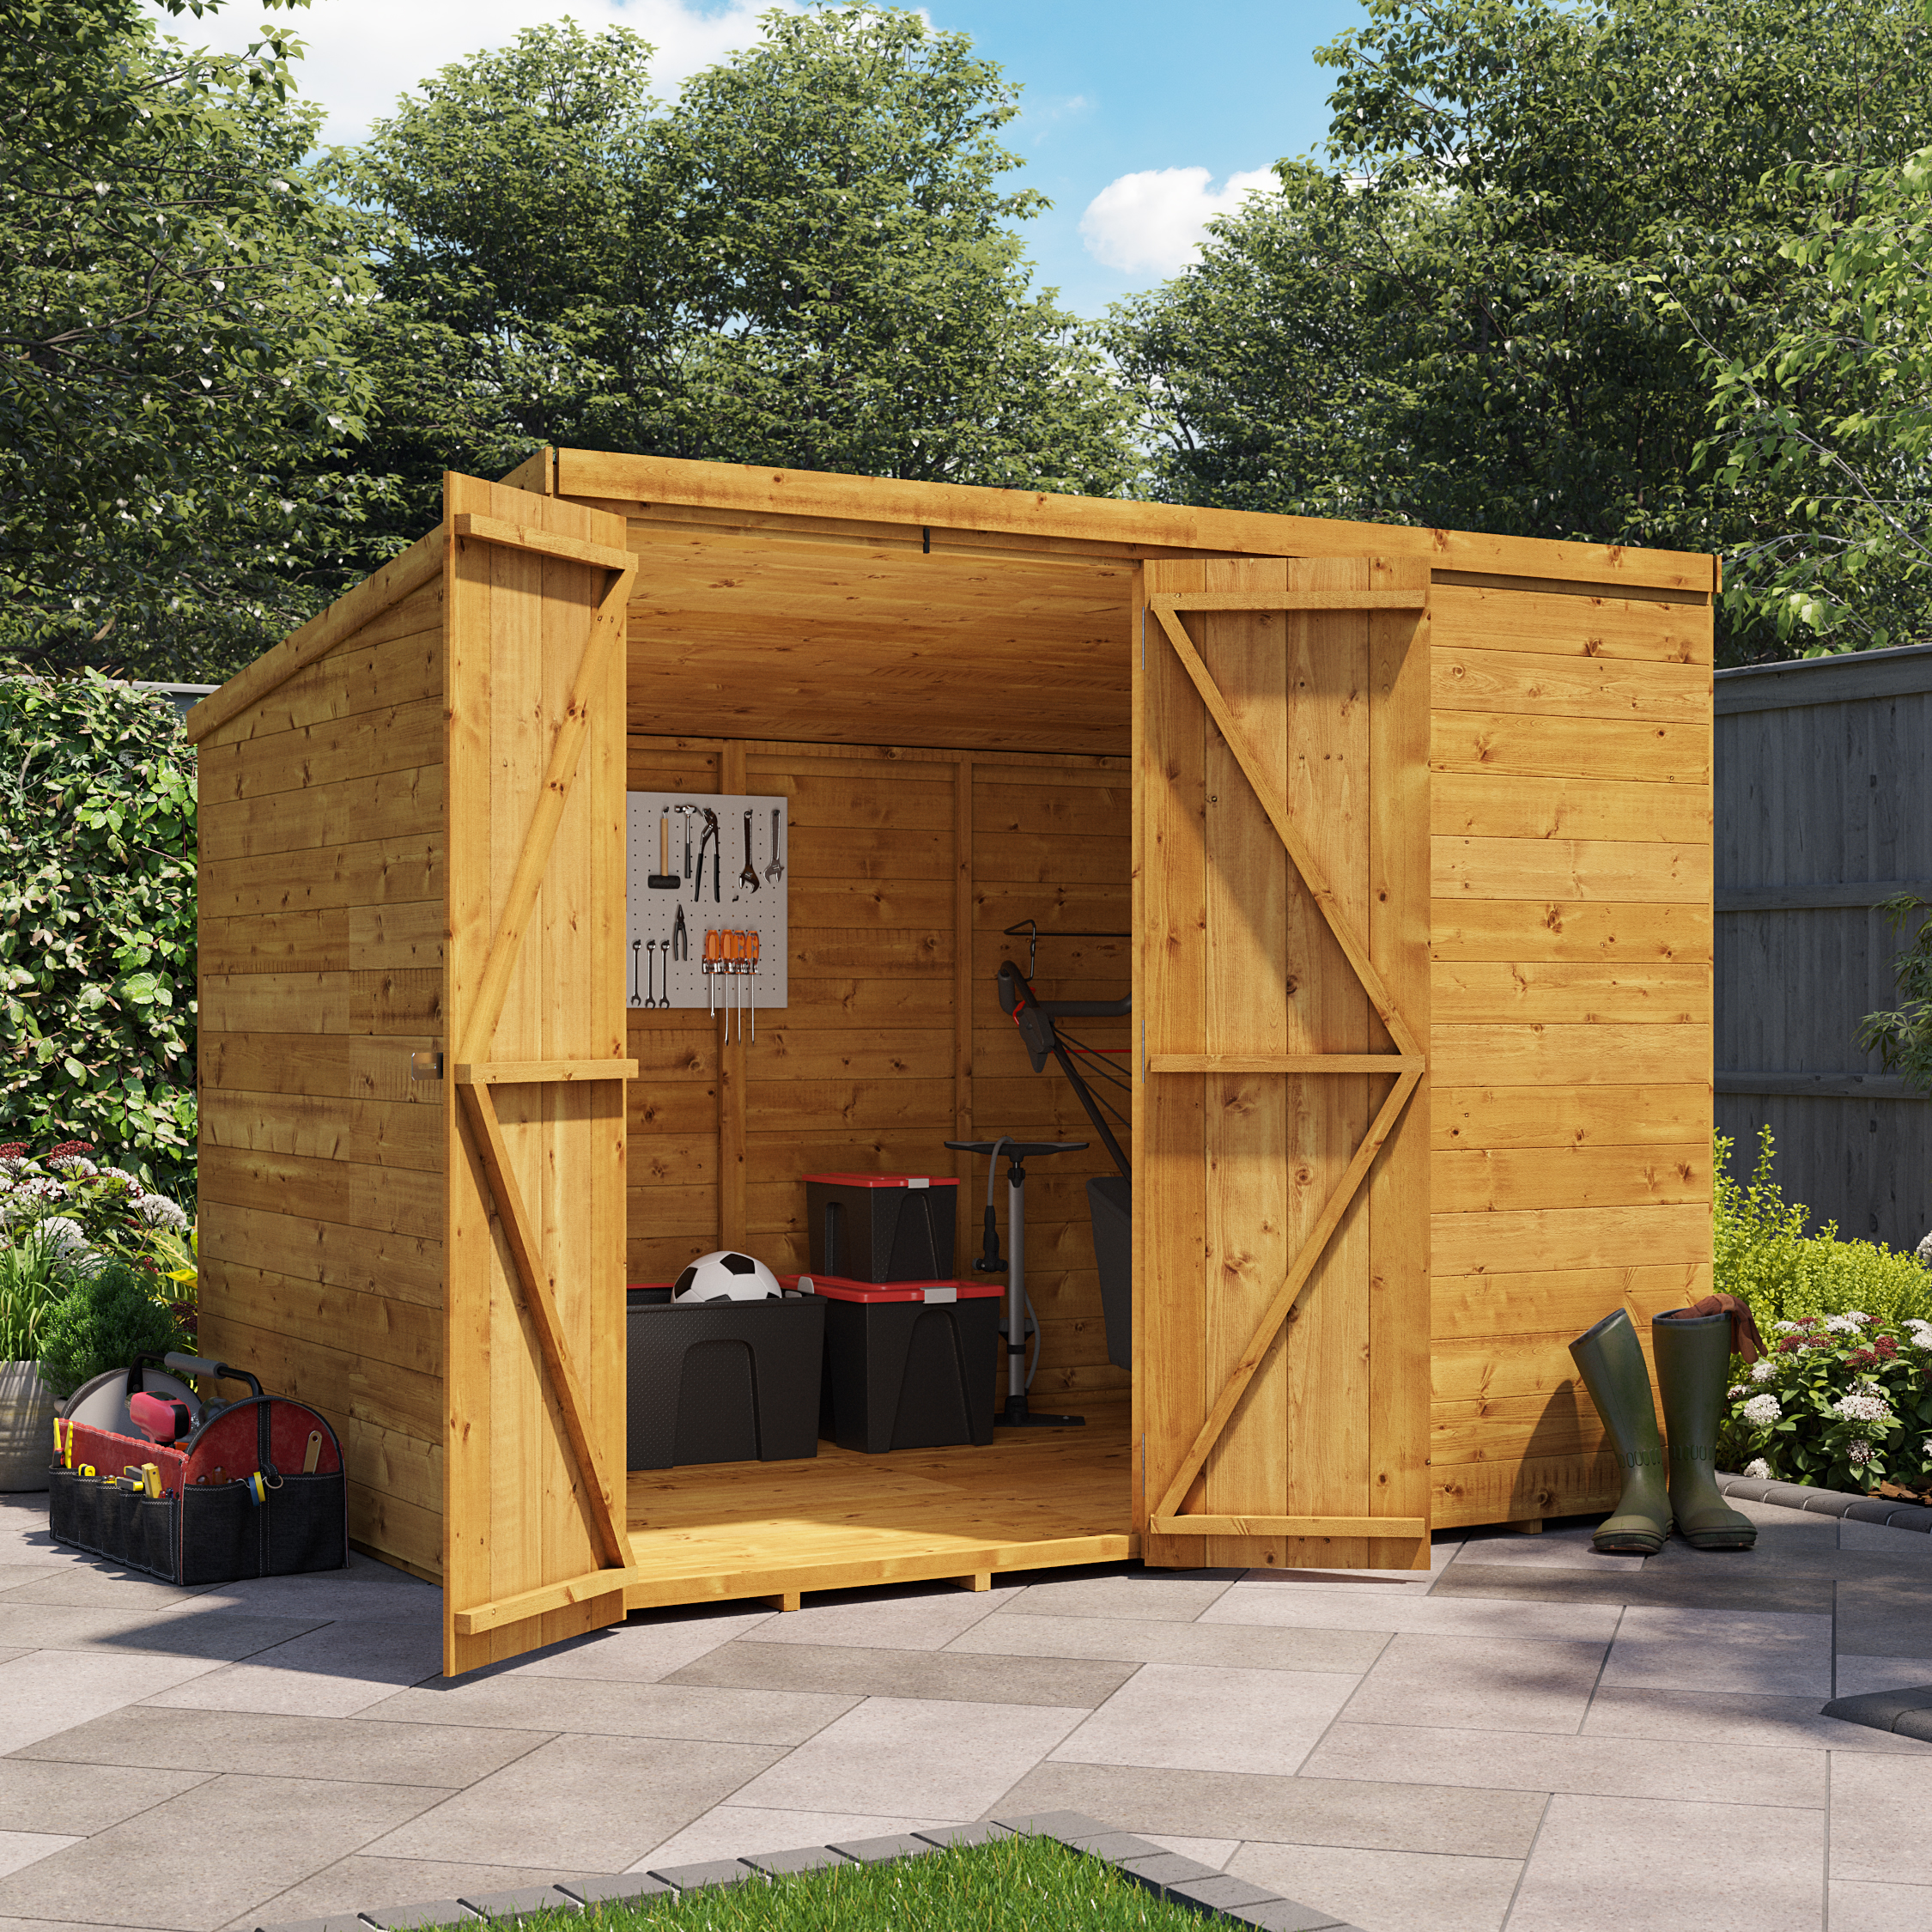 8 x 6 Shed - BillyOh Master Tongue and Groove Pent Shed - Pressure Treated Windowless 8x6 Wooden Garden Shed